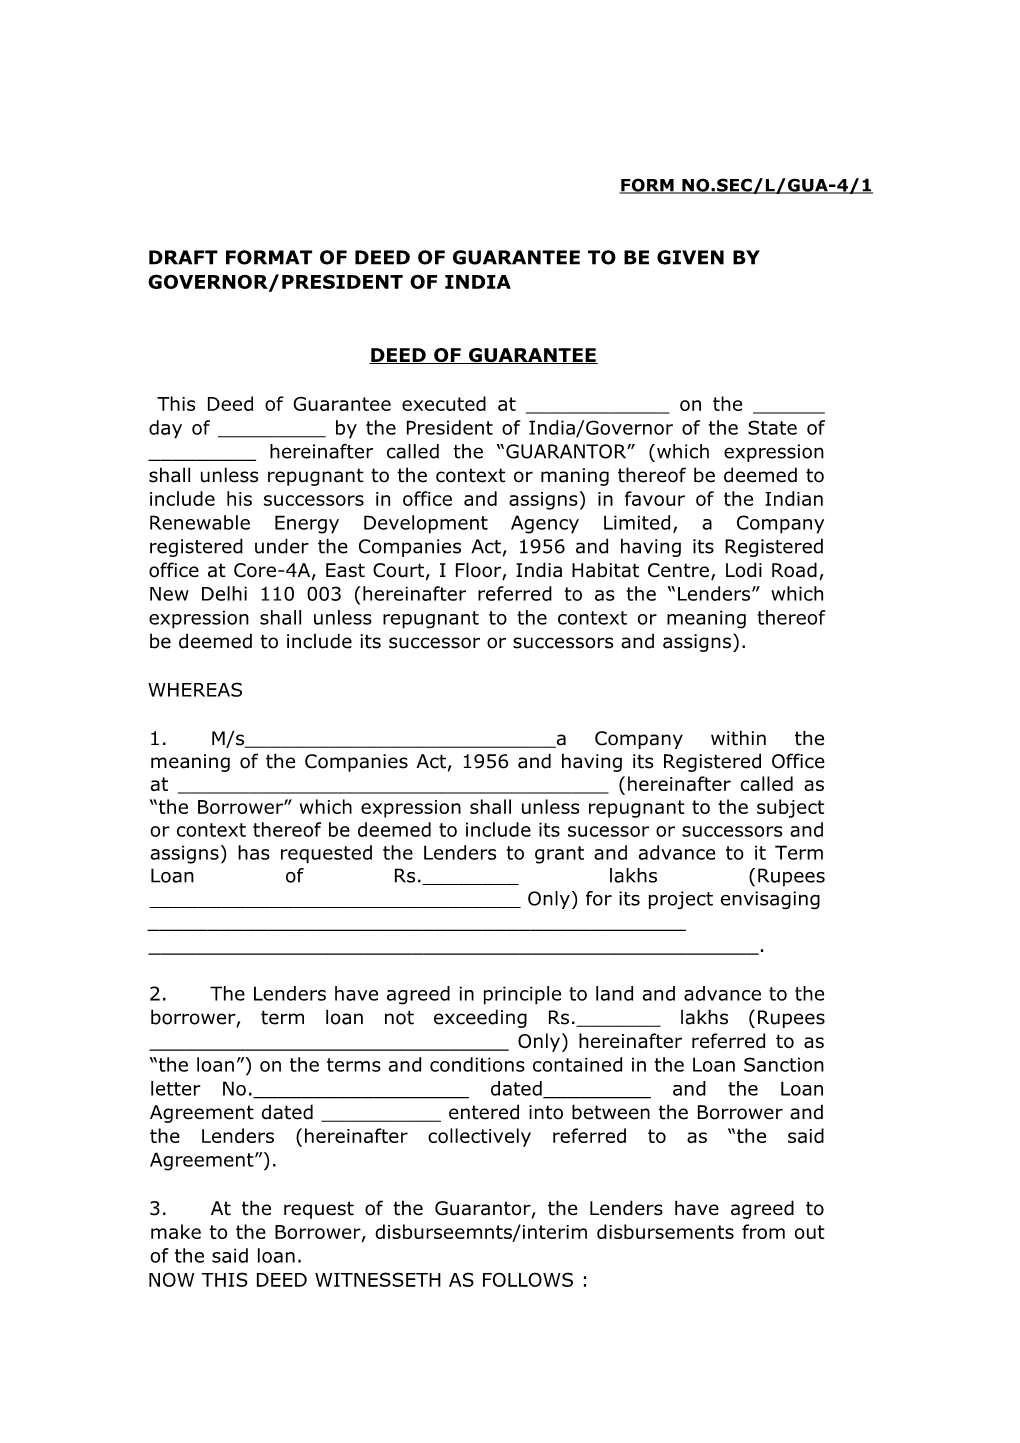 Draft Format of Deed of Guarantee to Be Given By